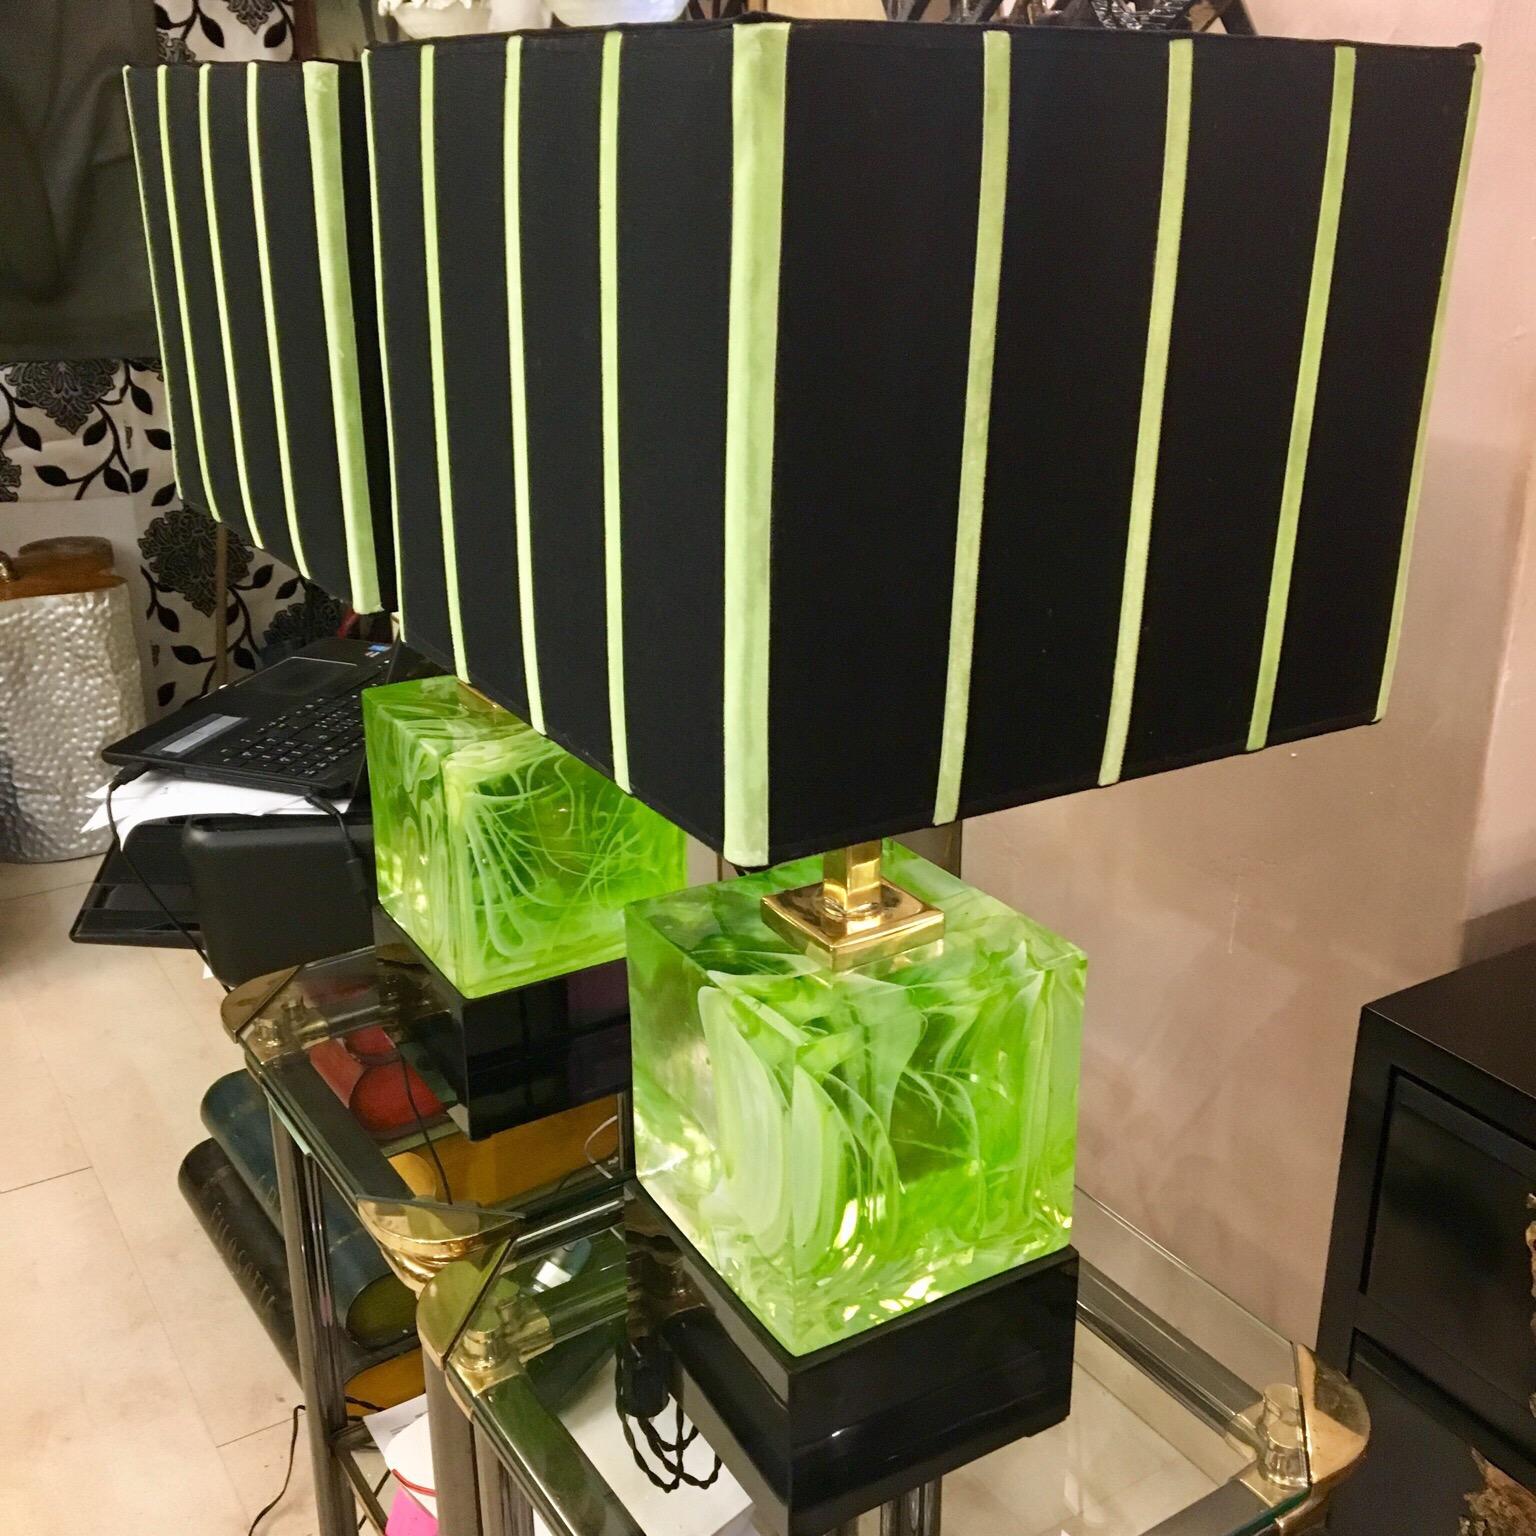 Pair of cubic acid green Murano glass lamps mixed effect, base in black plexiglass, cubic black lampshades with acid green velvet ribbon, brass structure. Measurements of the base lamp without lampshade cm 17 x 17 x 26.